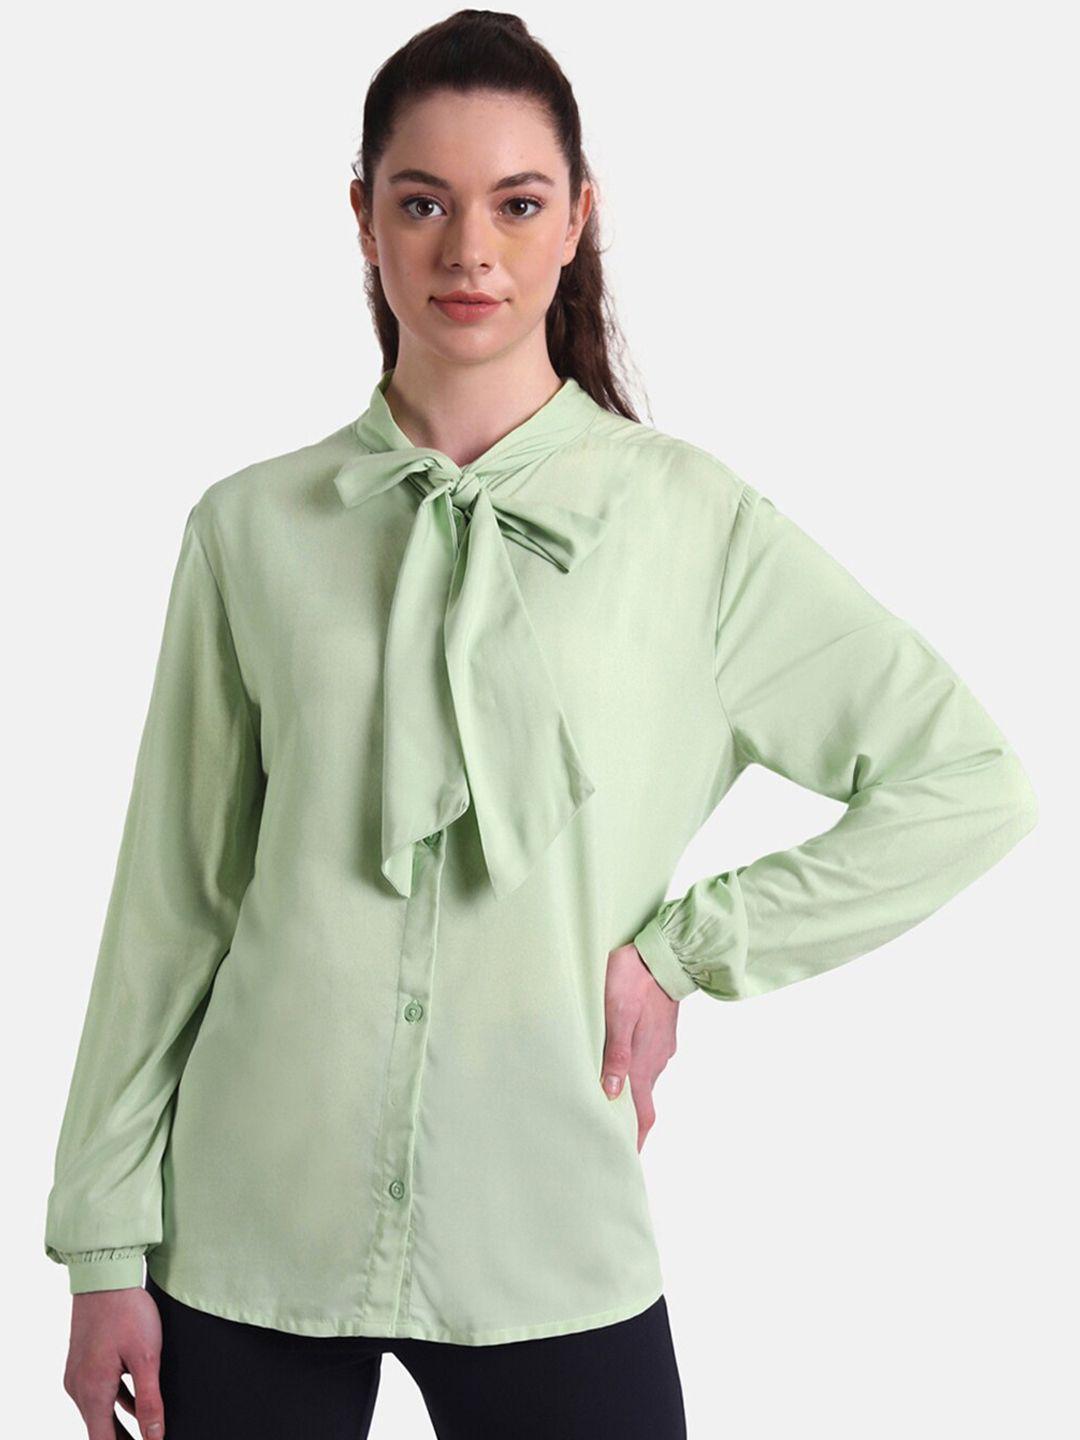 united colors of benetton green tie-up neck shirt style top